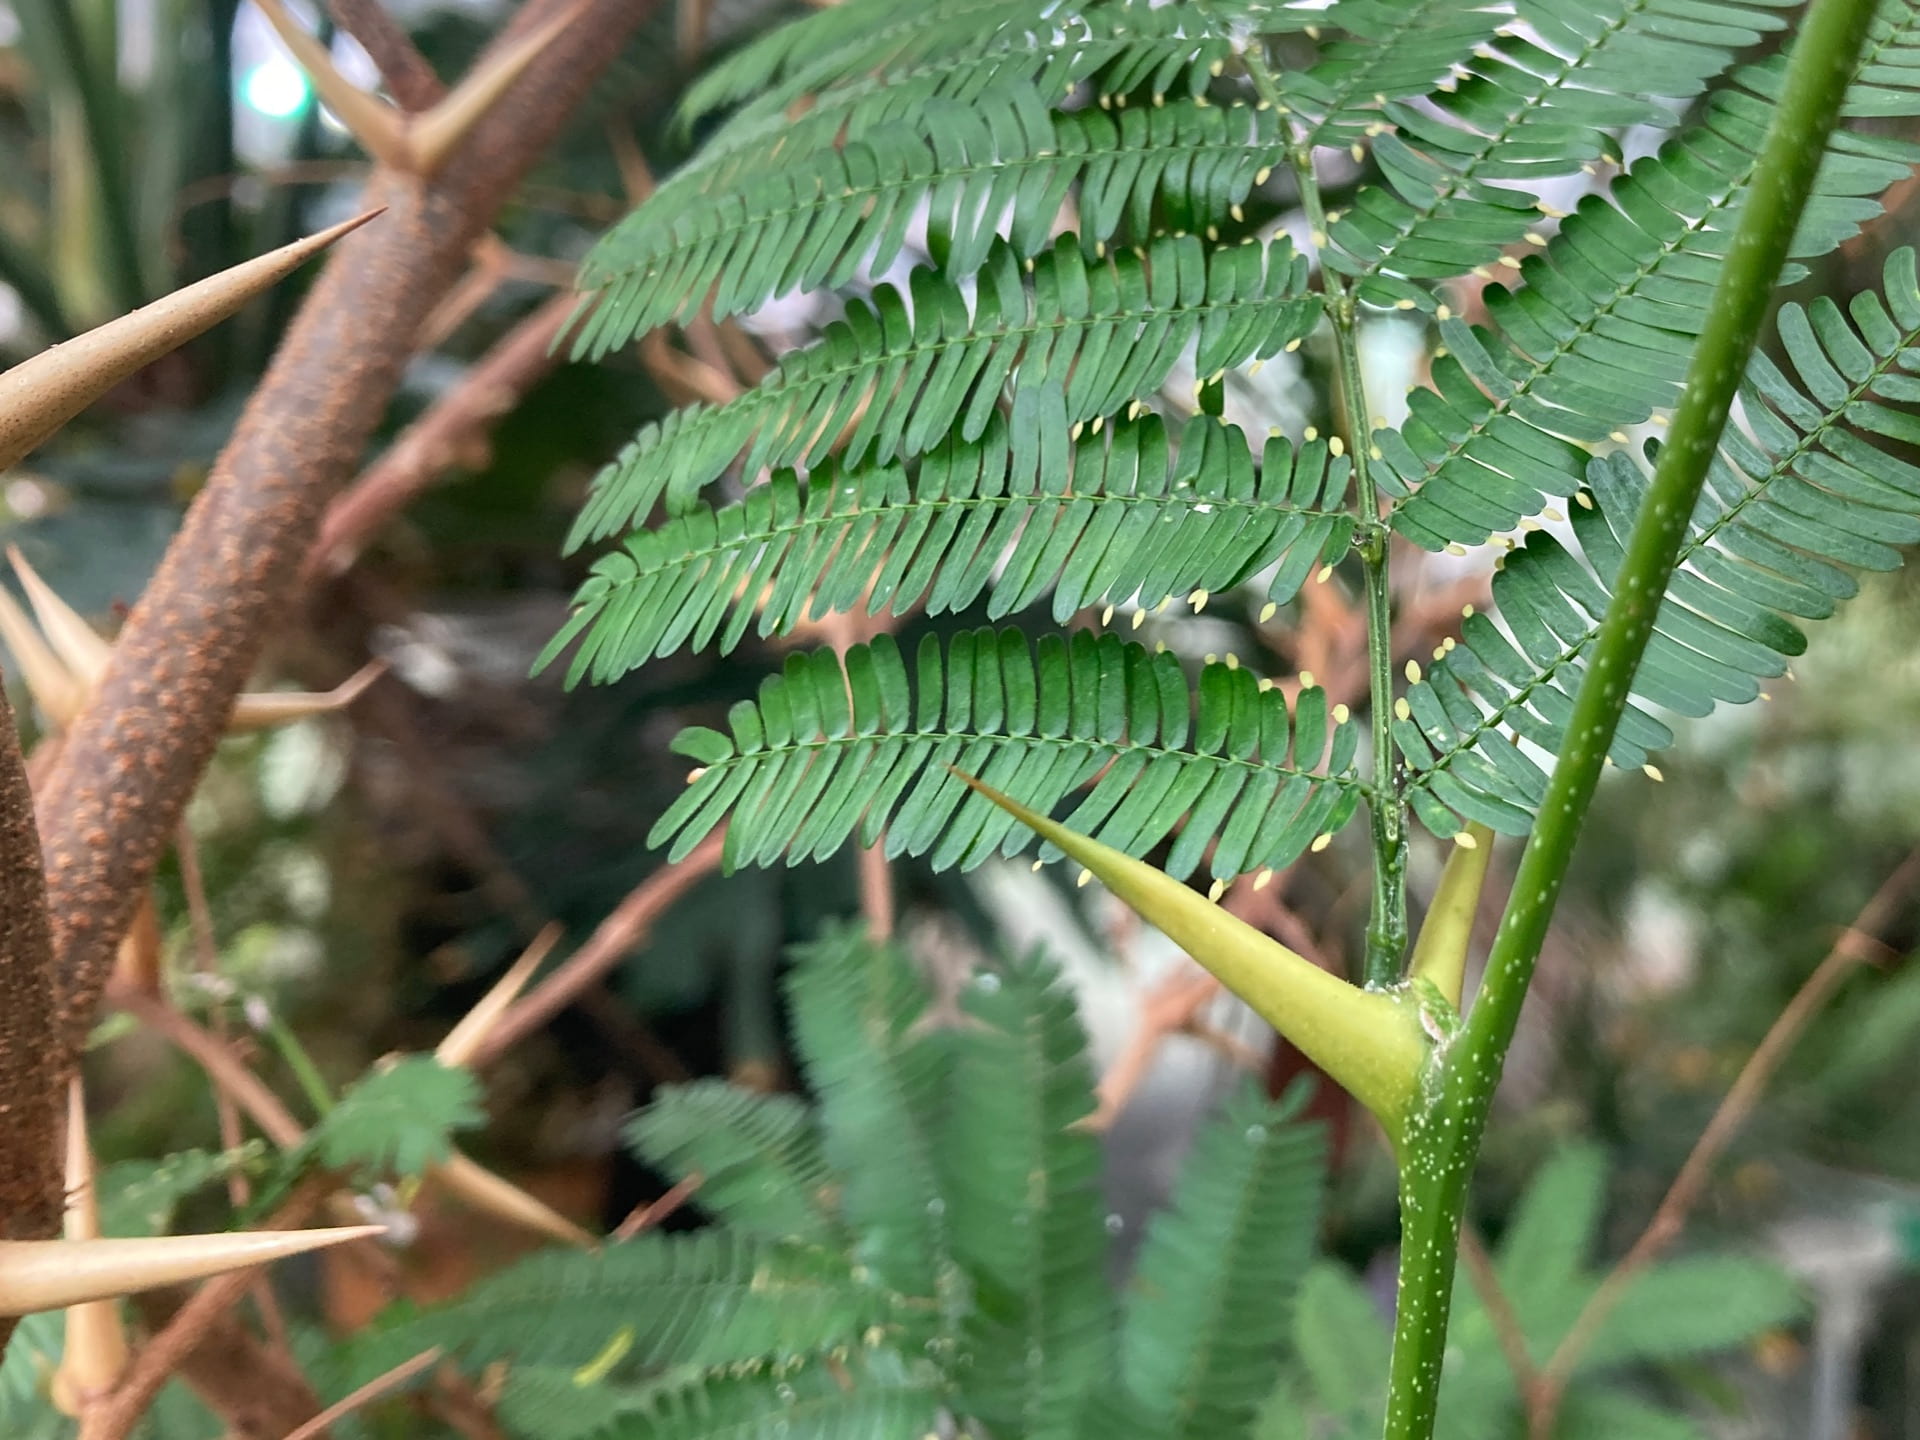 The bullhorn acacia, Vachellia cornigera, provides a habitat for ants in its hollow thorns and produces protein, sugar, and lipid rich Beltian bodies at the tips of its leaves as food.